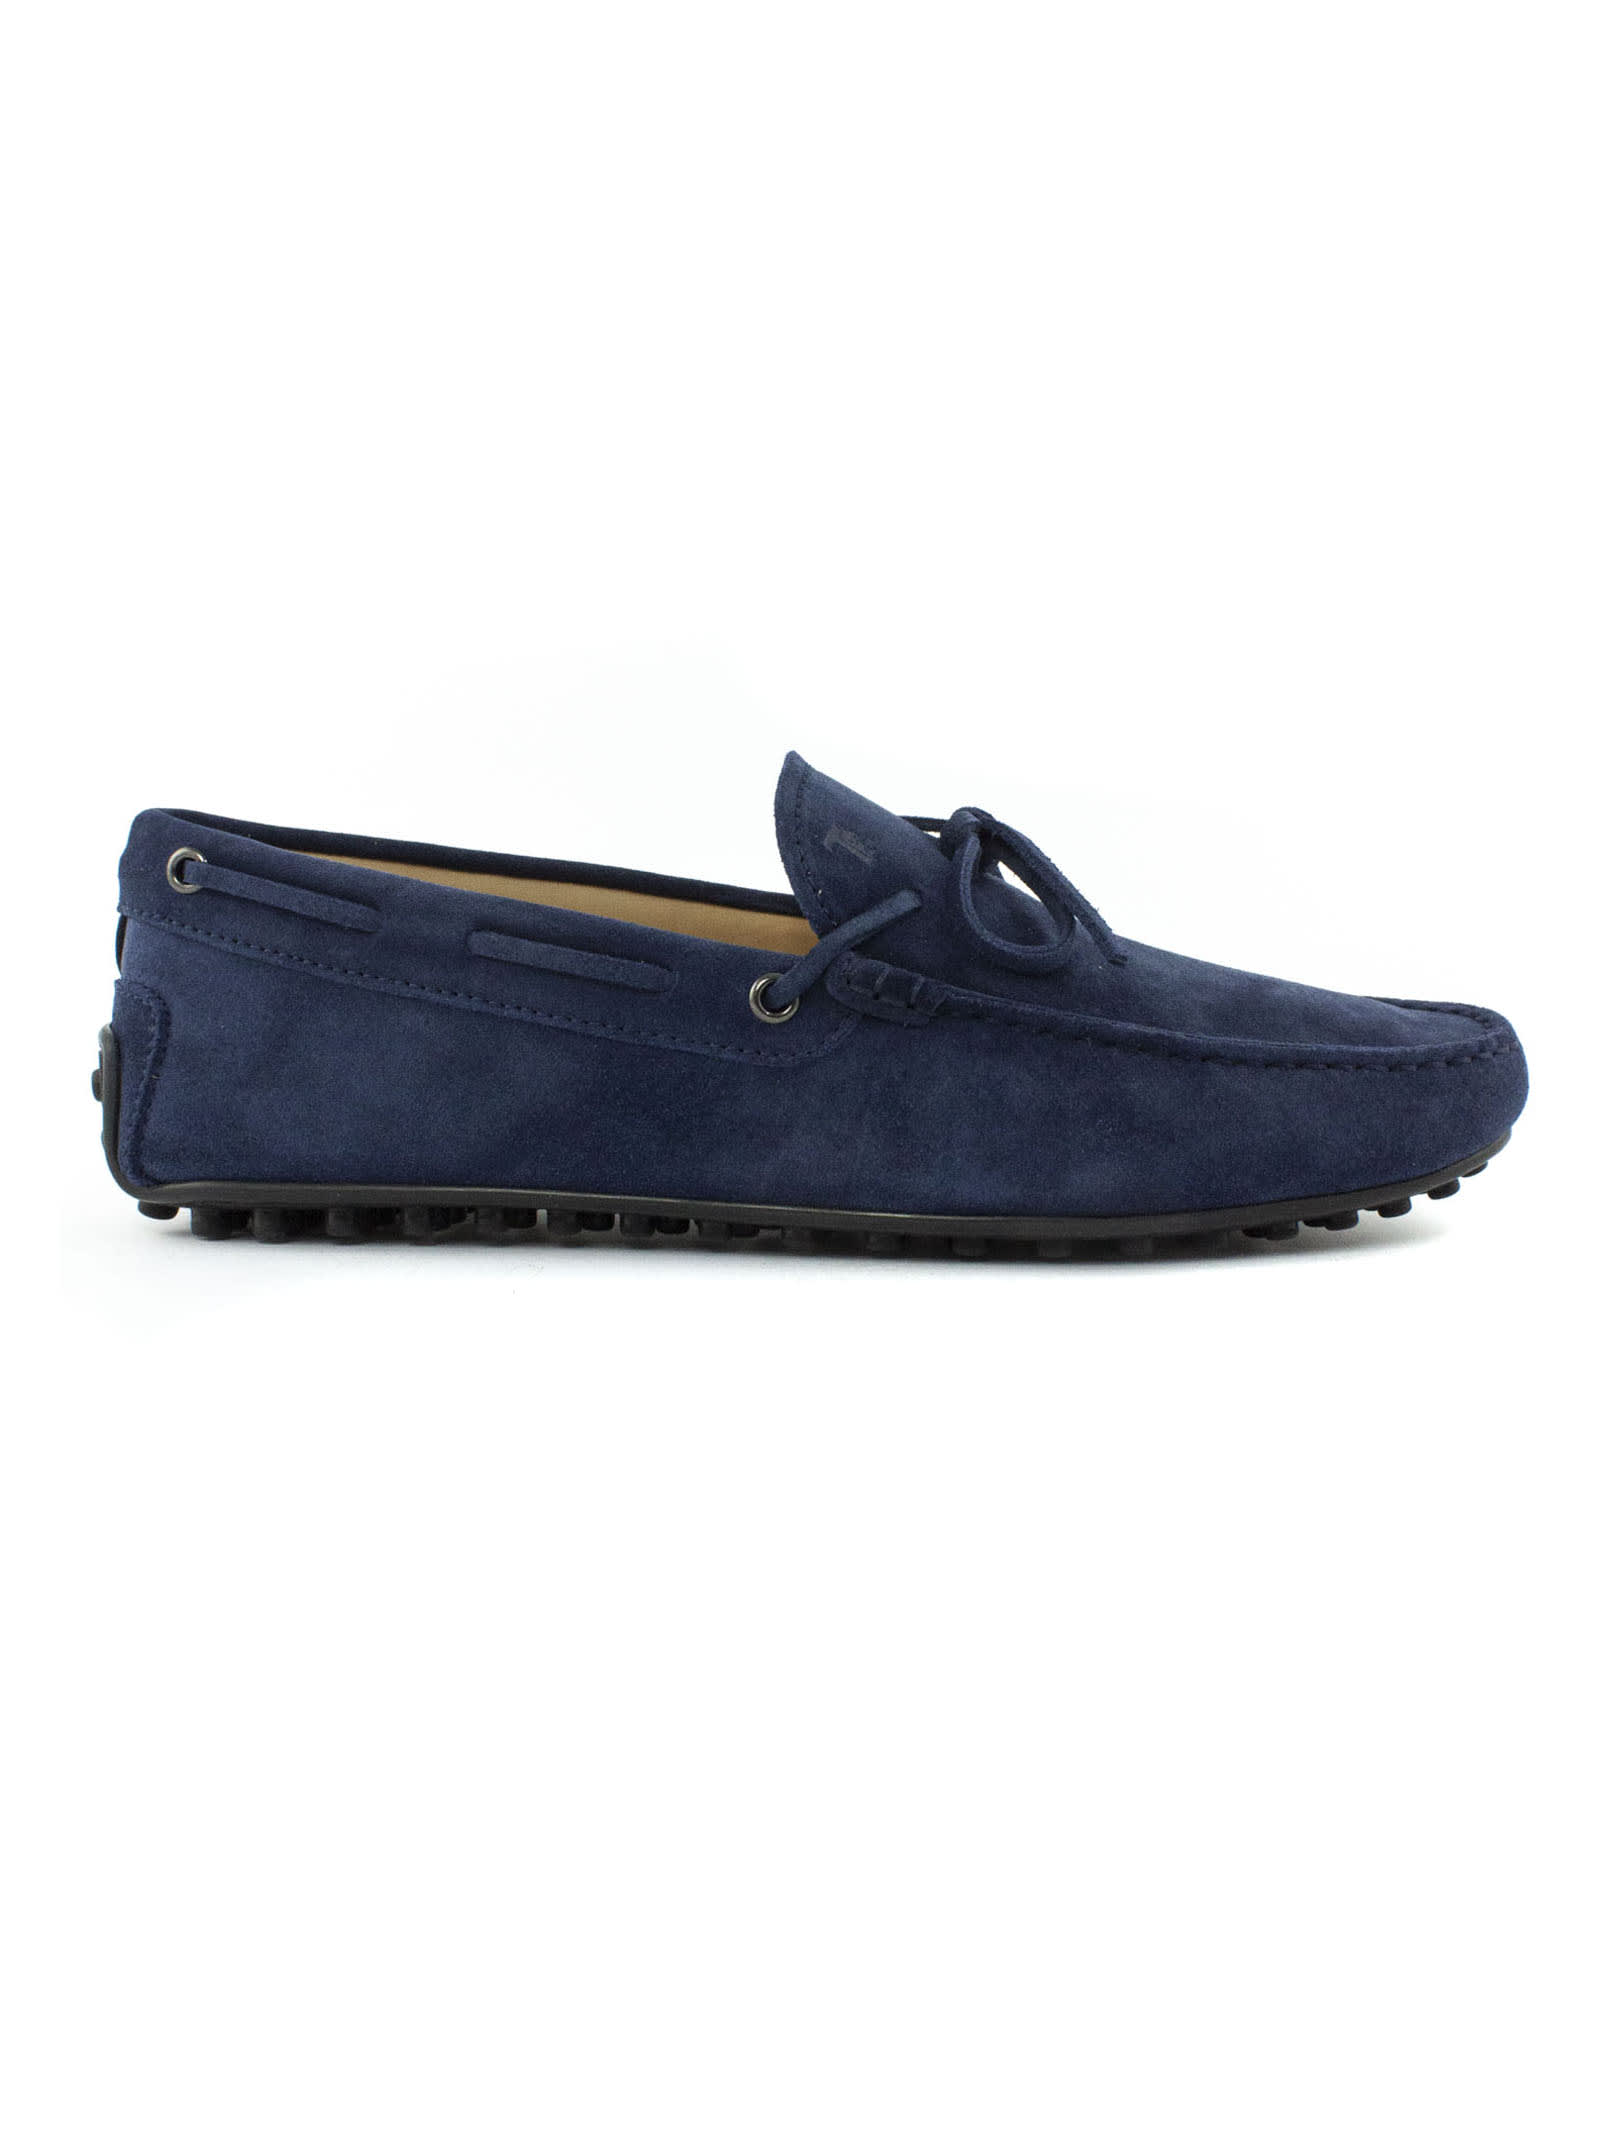 Tods Blue Gommino Driving Shoes